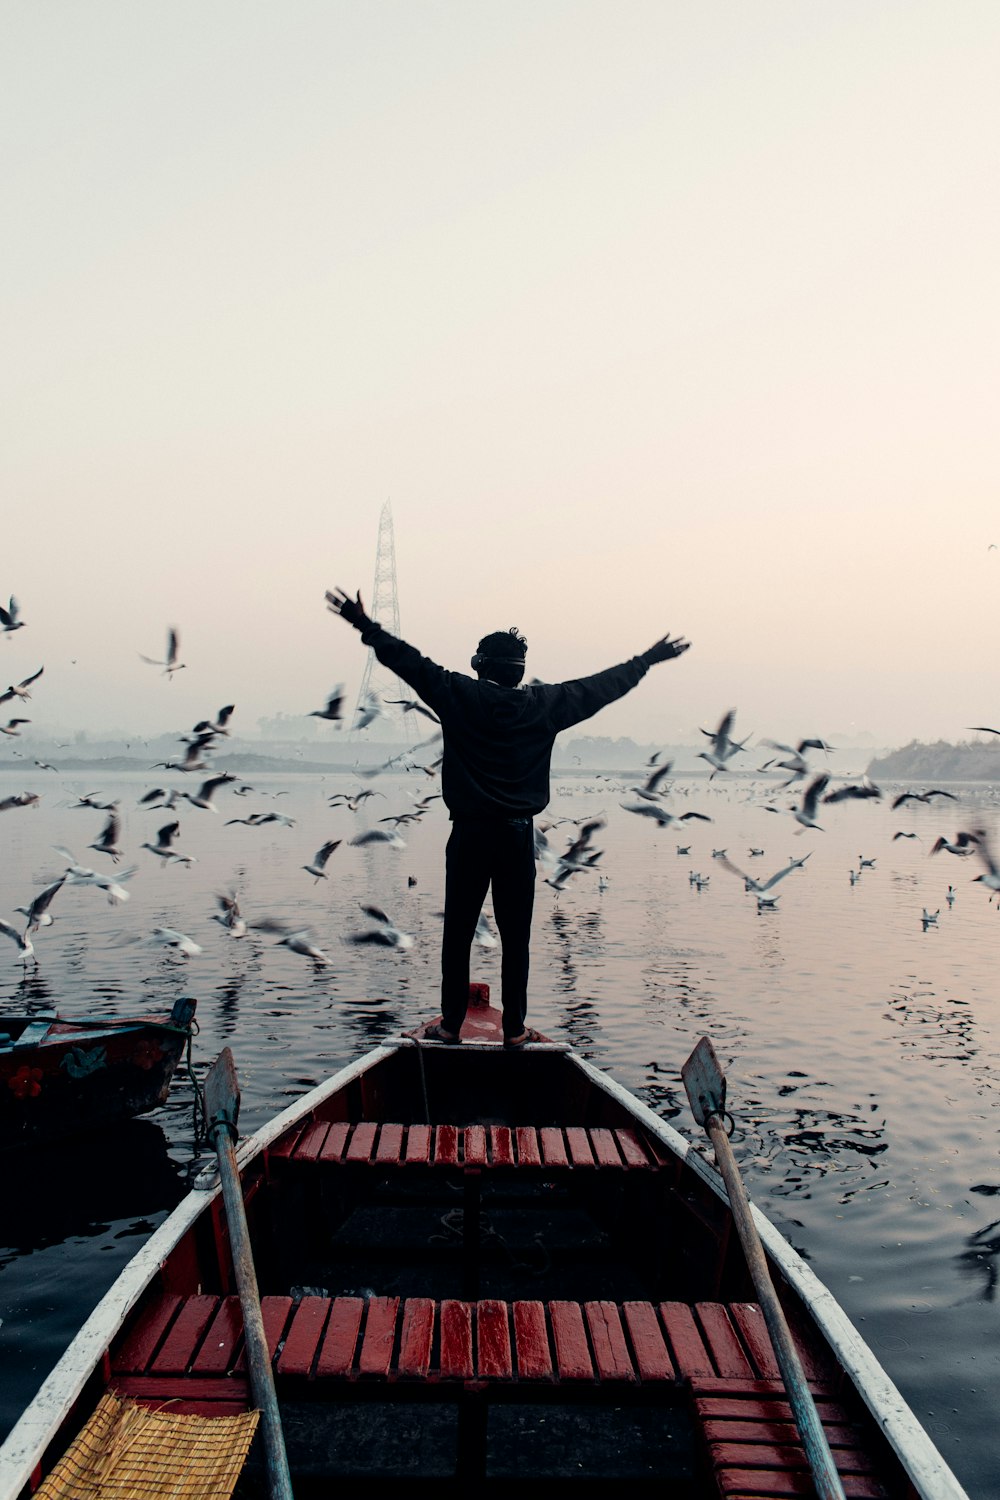 a man standing on the bow of a boat surrounded by seagulls